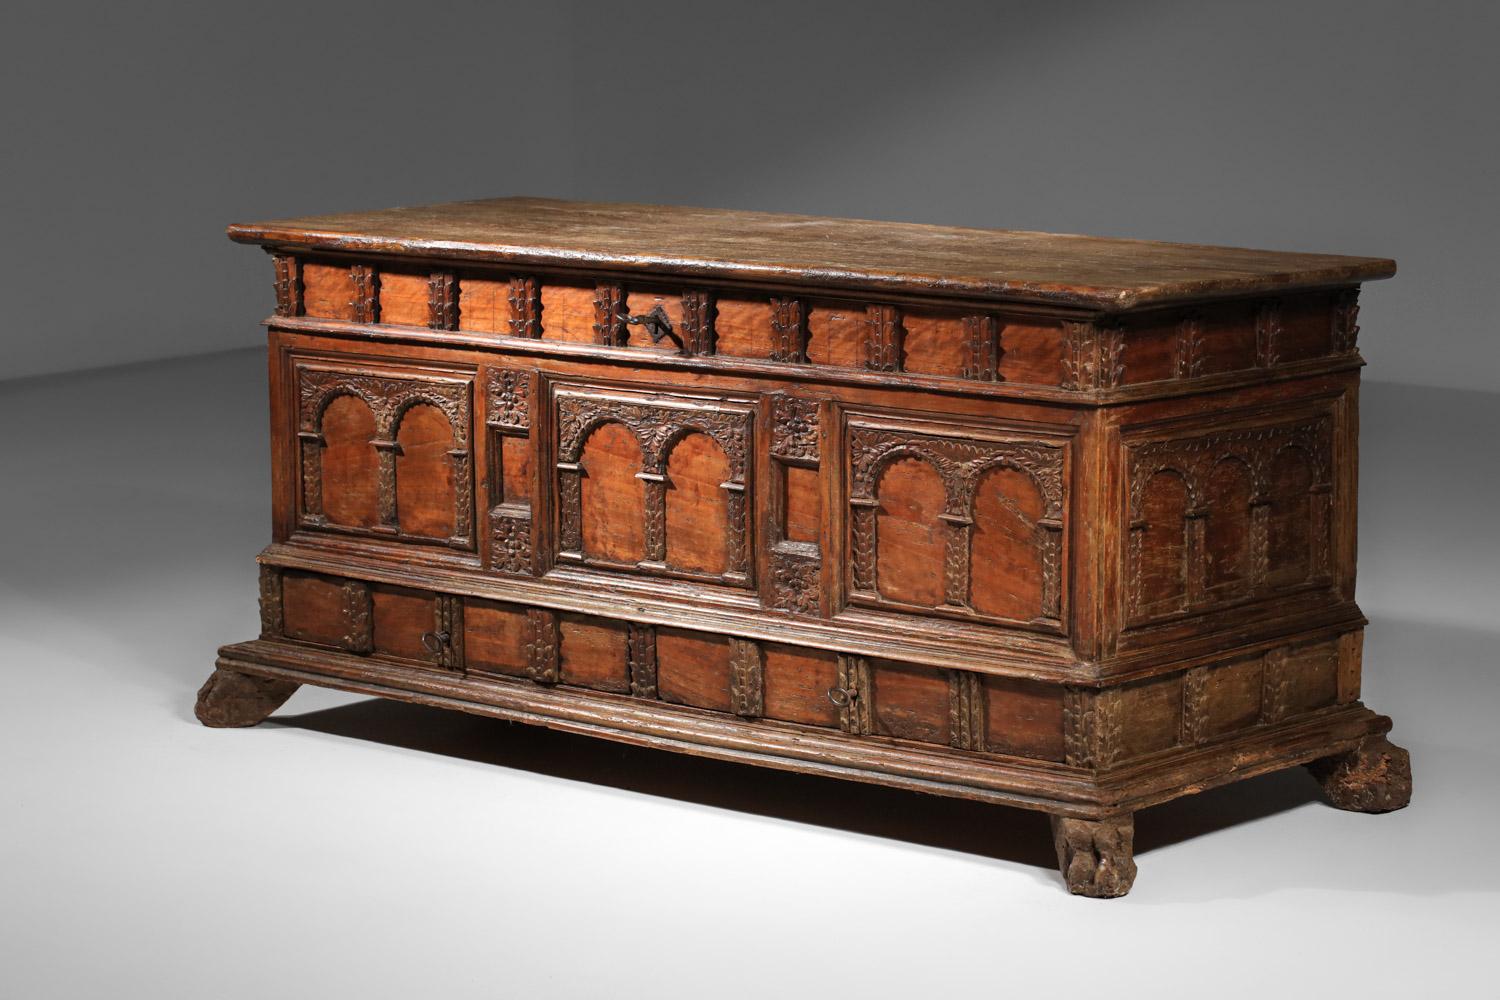 Walnut 17th century Spanish or Italian carved solid wood chest For Sale